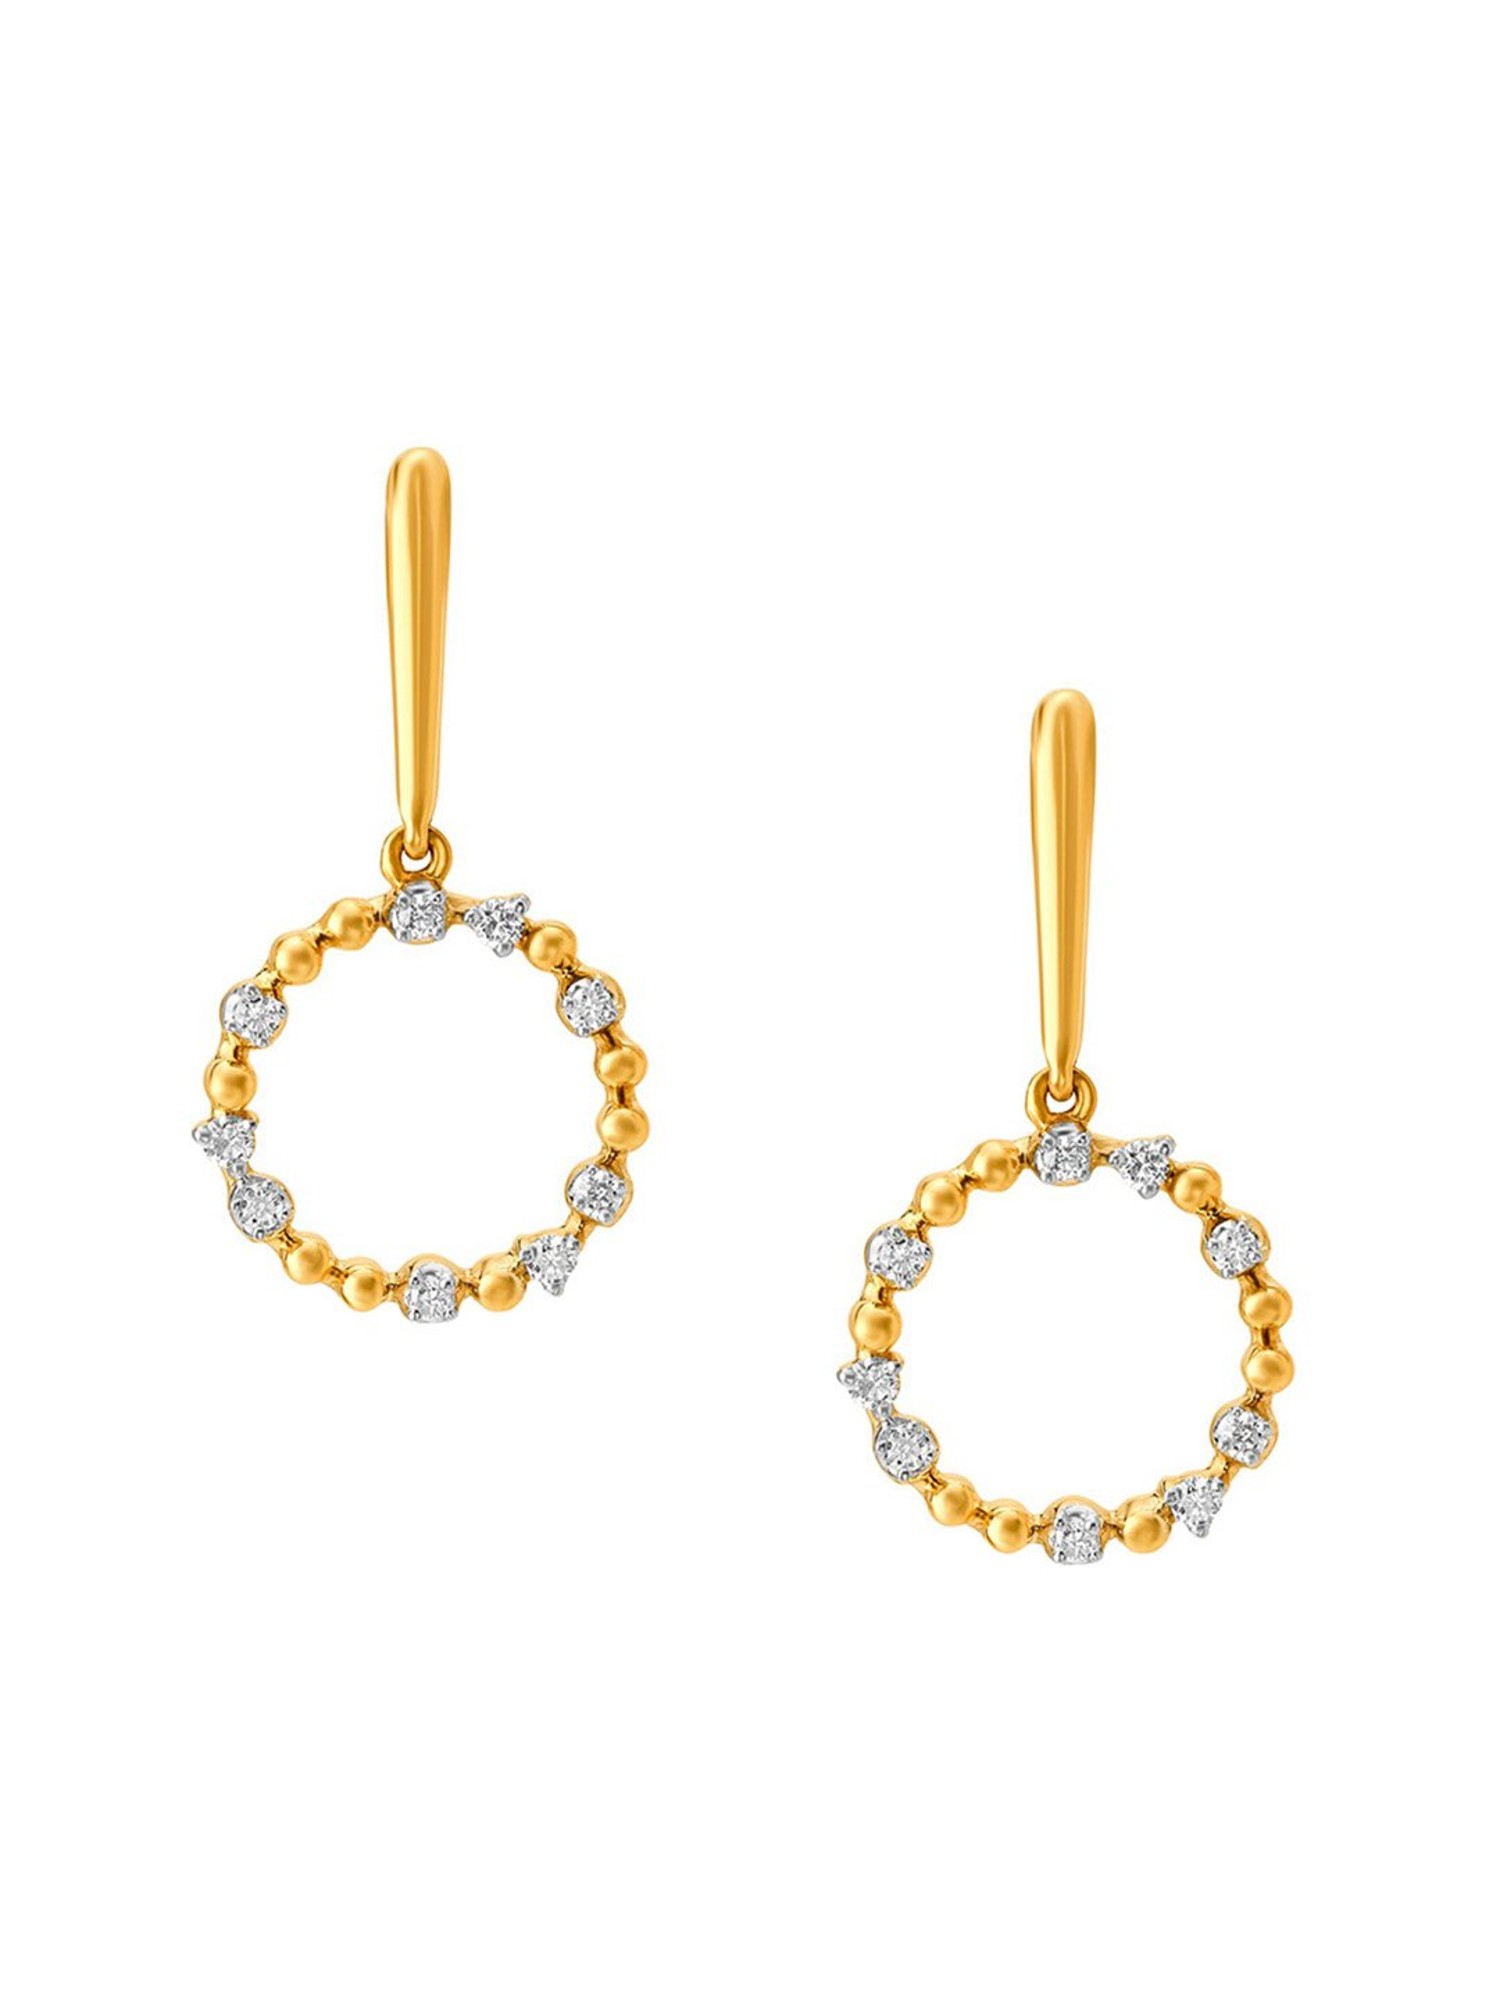 Mia by Tanishq 14 KT Yellow And White Gold Geometric Diamond Stud Earrings  Yellow Gold 14kt Stud Earring Price in India - Buy Mia by Tanishq 14 KT  Yellow And White Gold